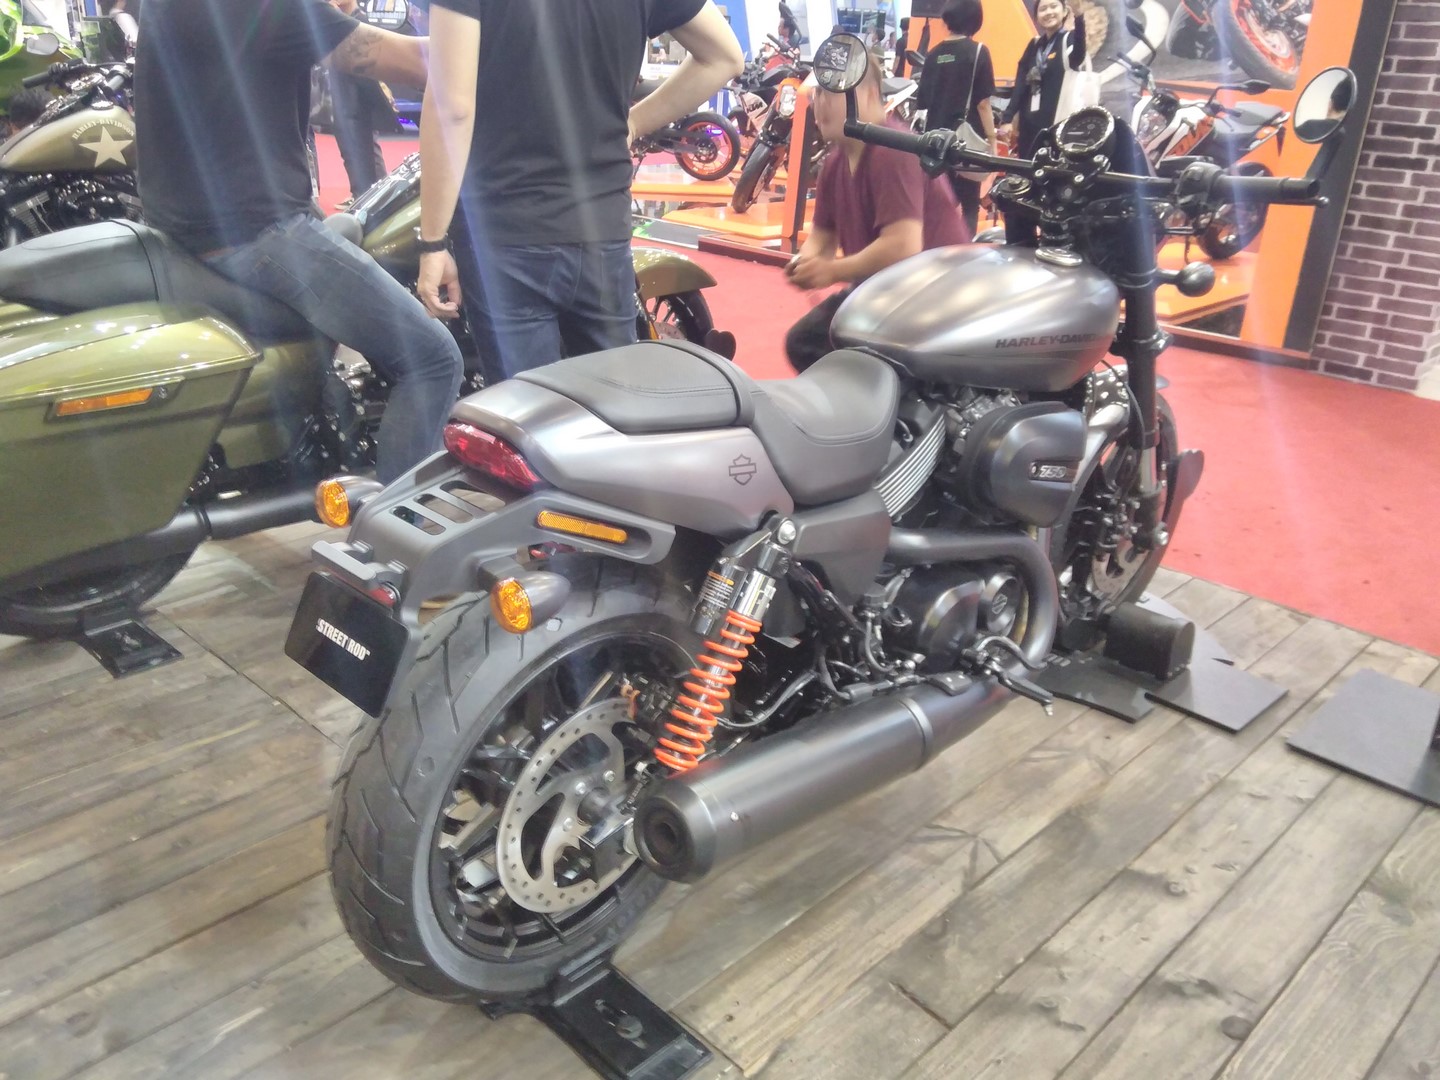 2017 Harley Davidson Street Rod Launched In Indonesia Ndash Giias 2017 Live